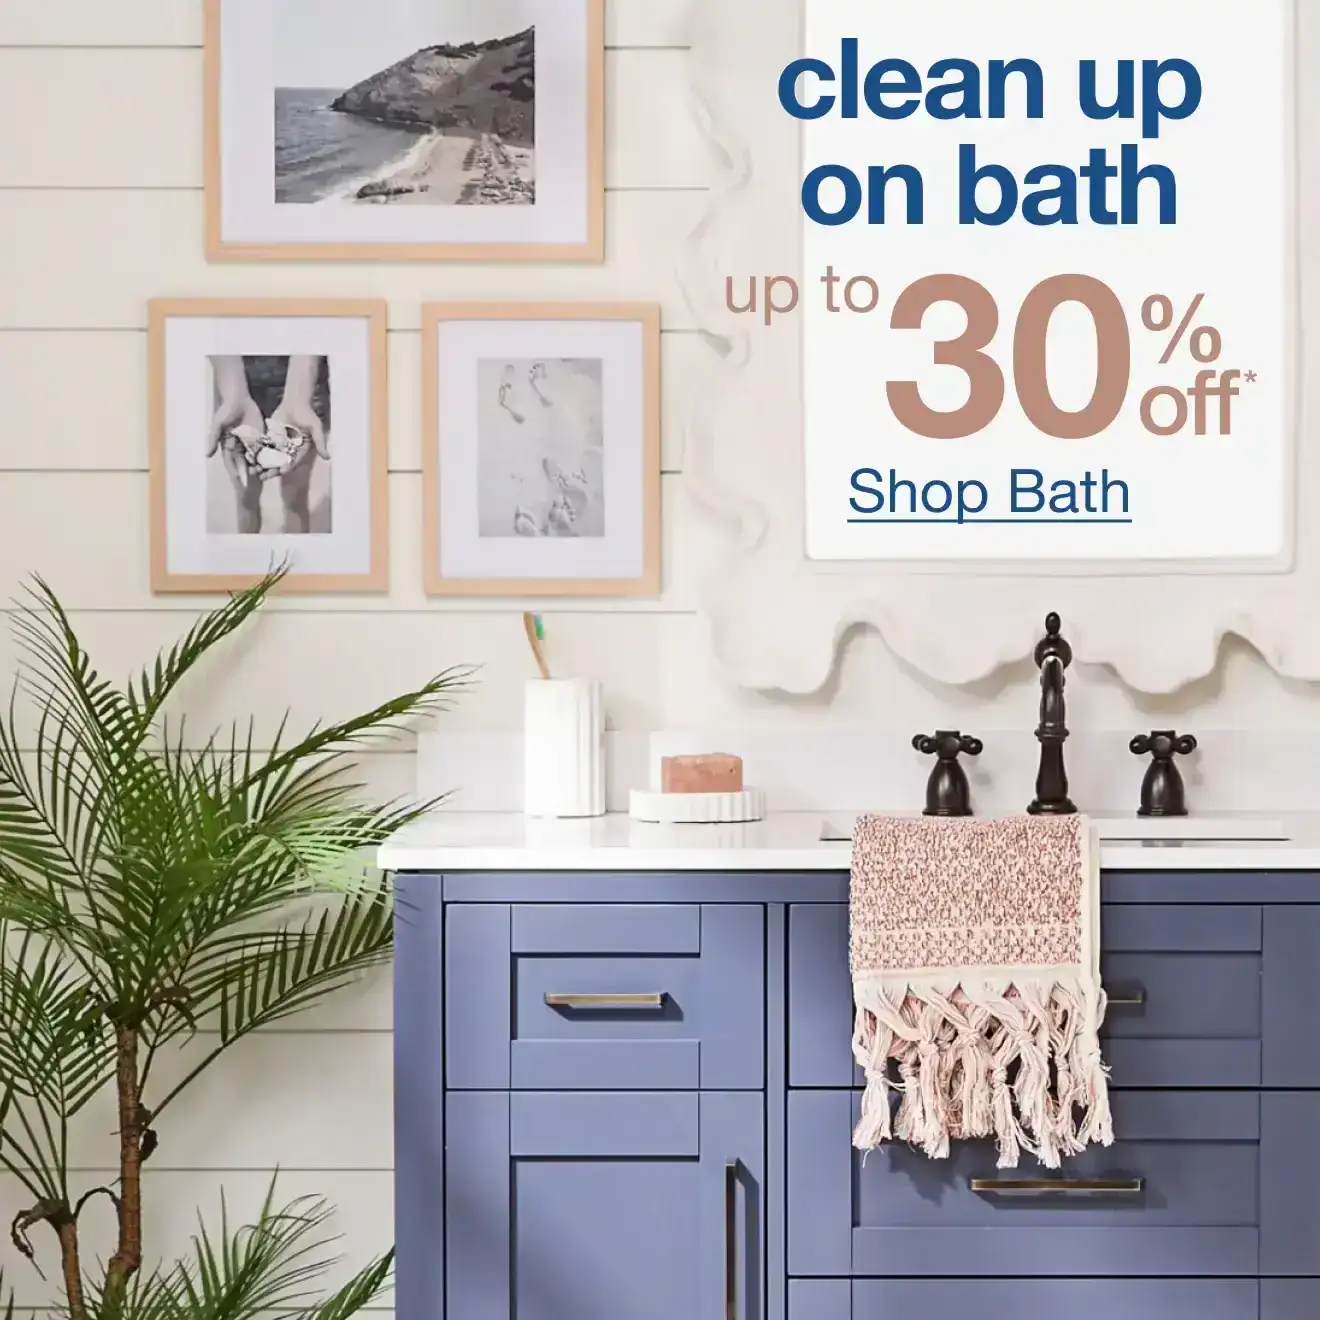 Bath Up to 30% off - Shop Now